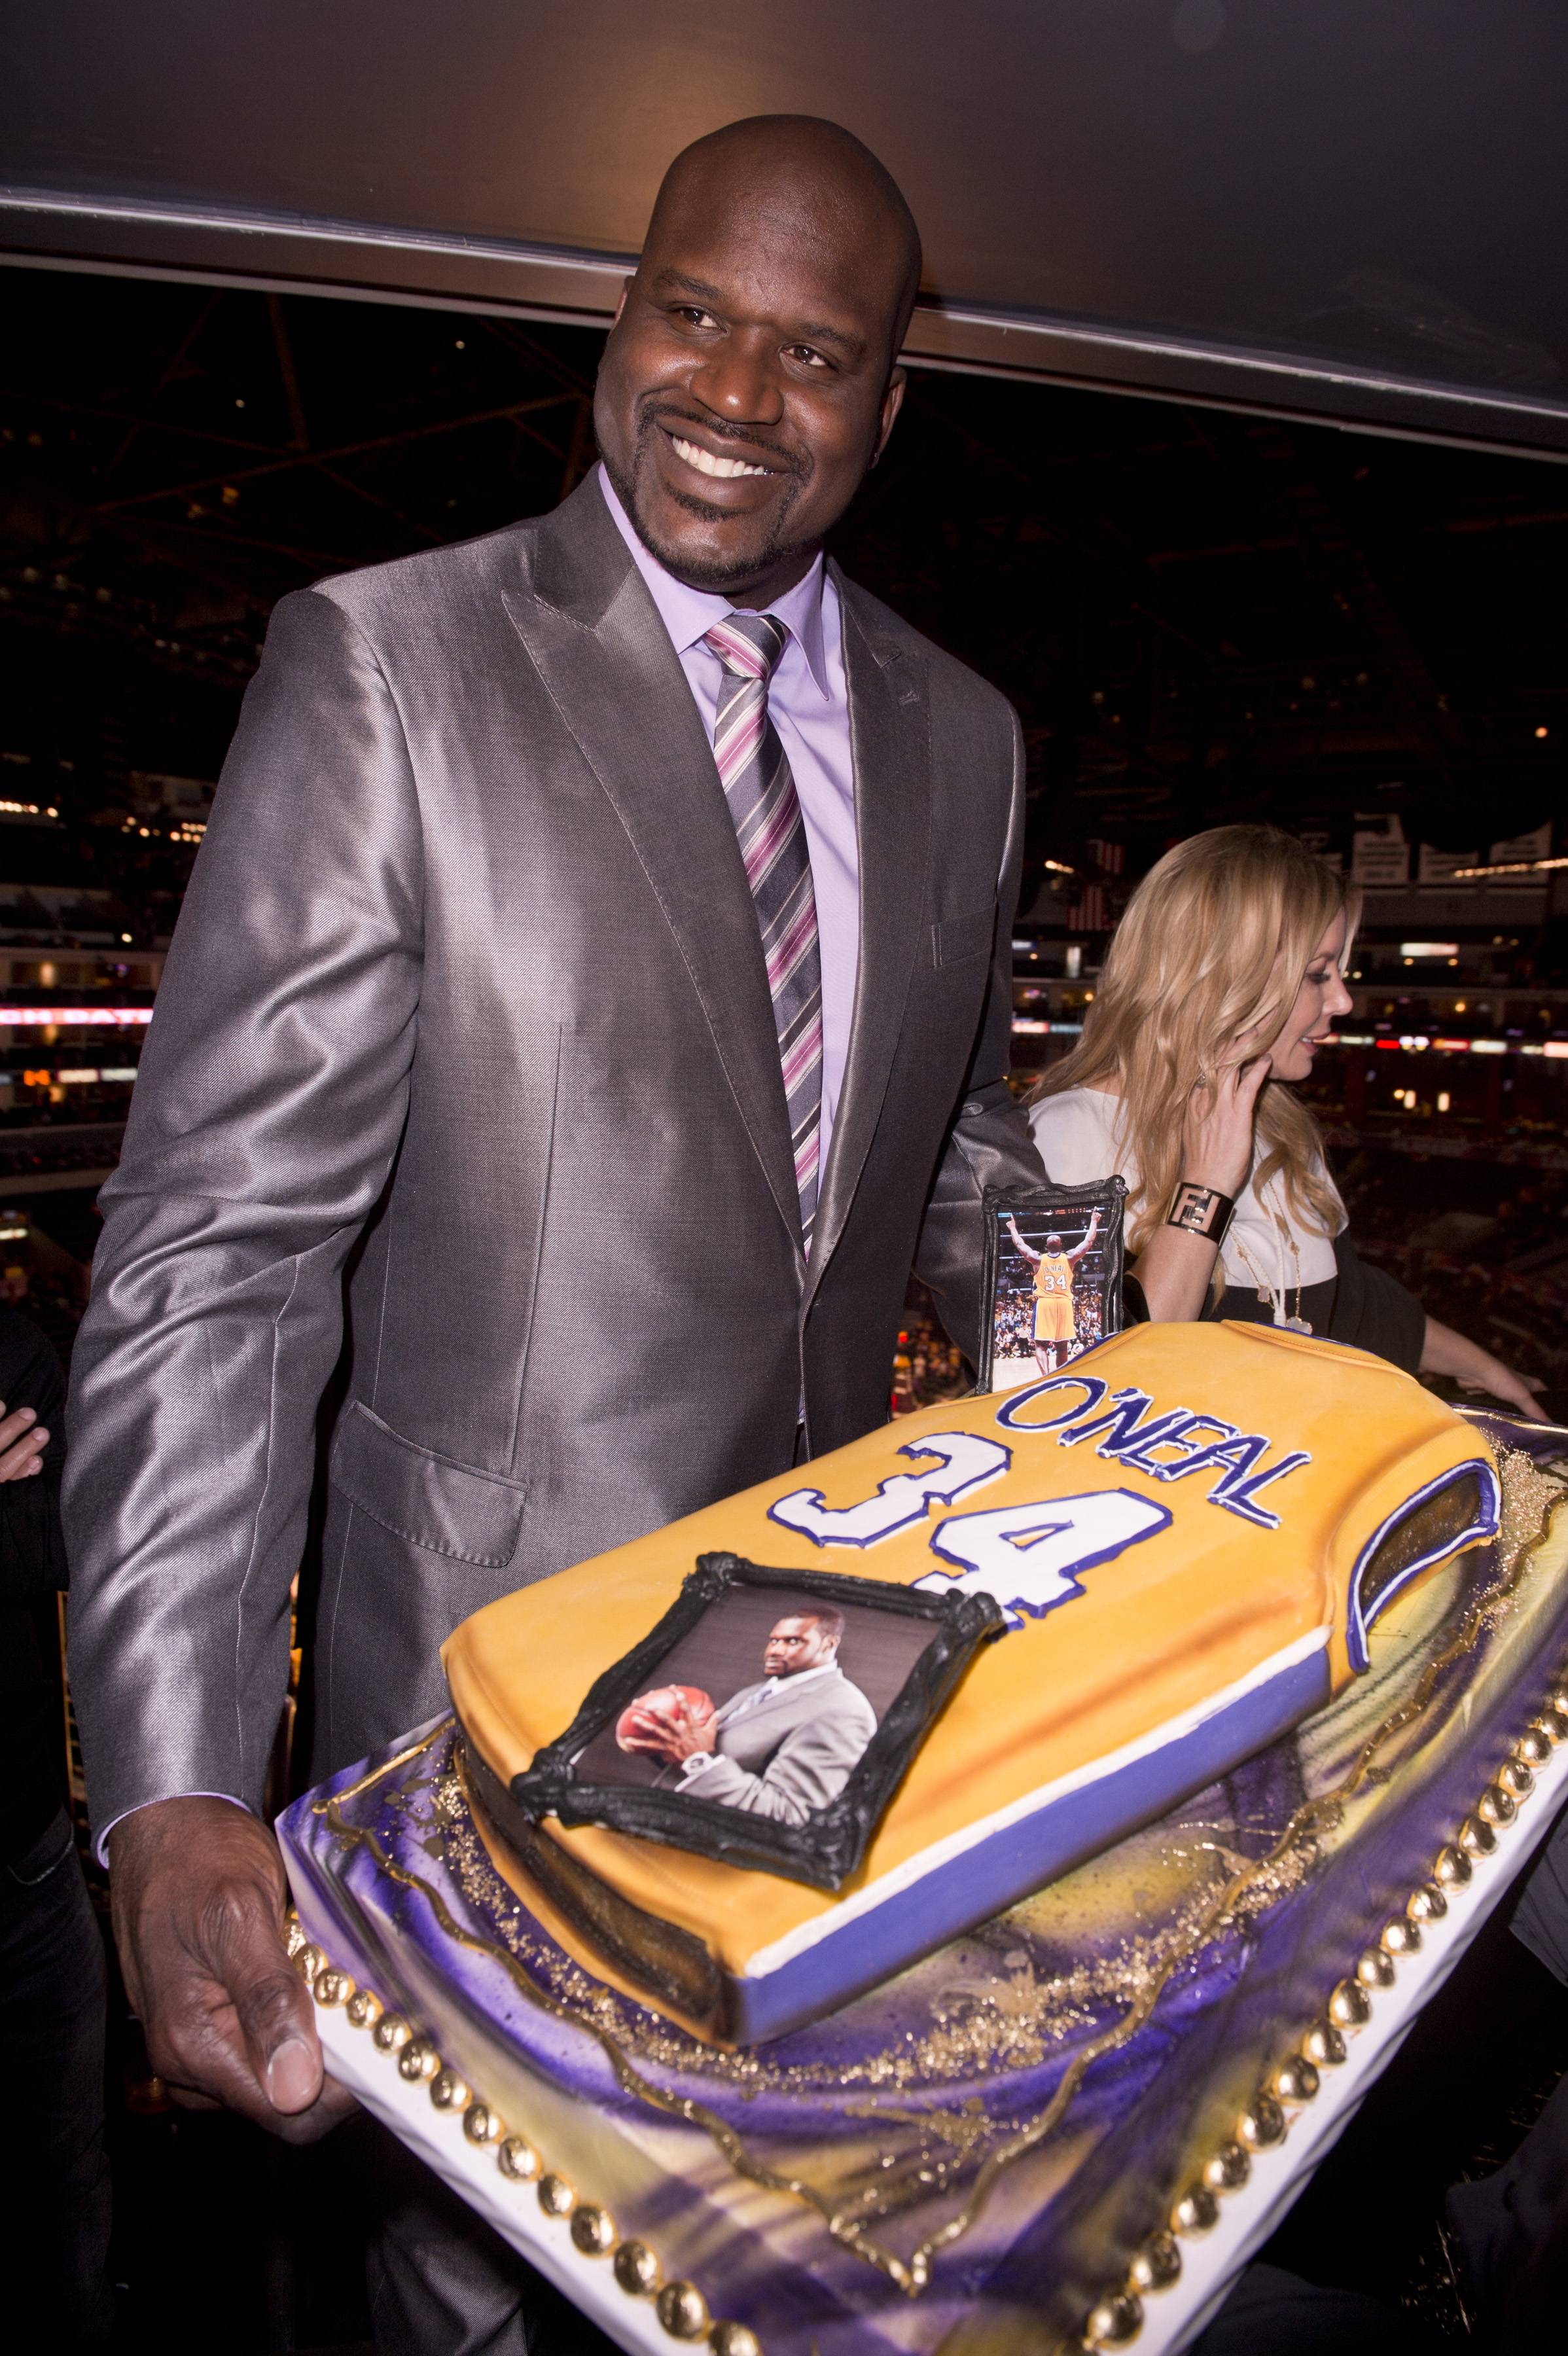 Shaquille O’Neal’s Retirement of his jersey party